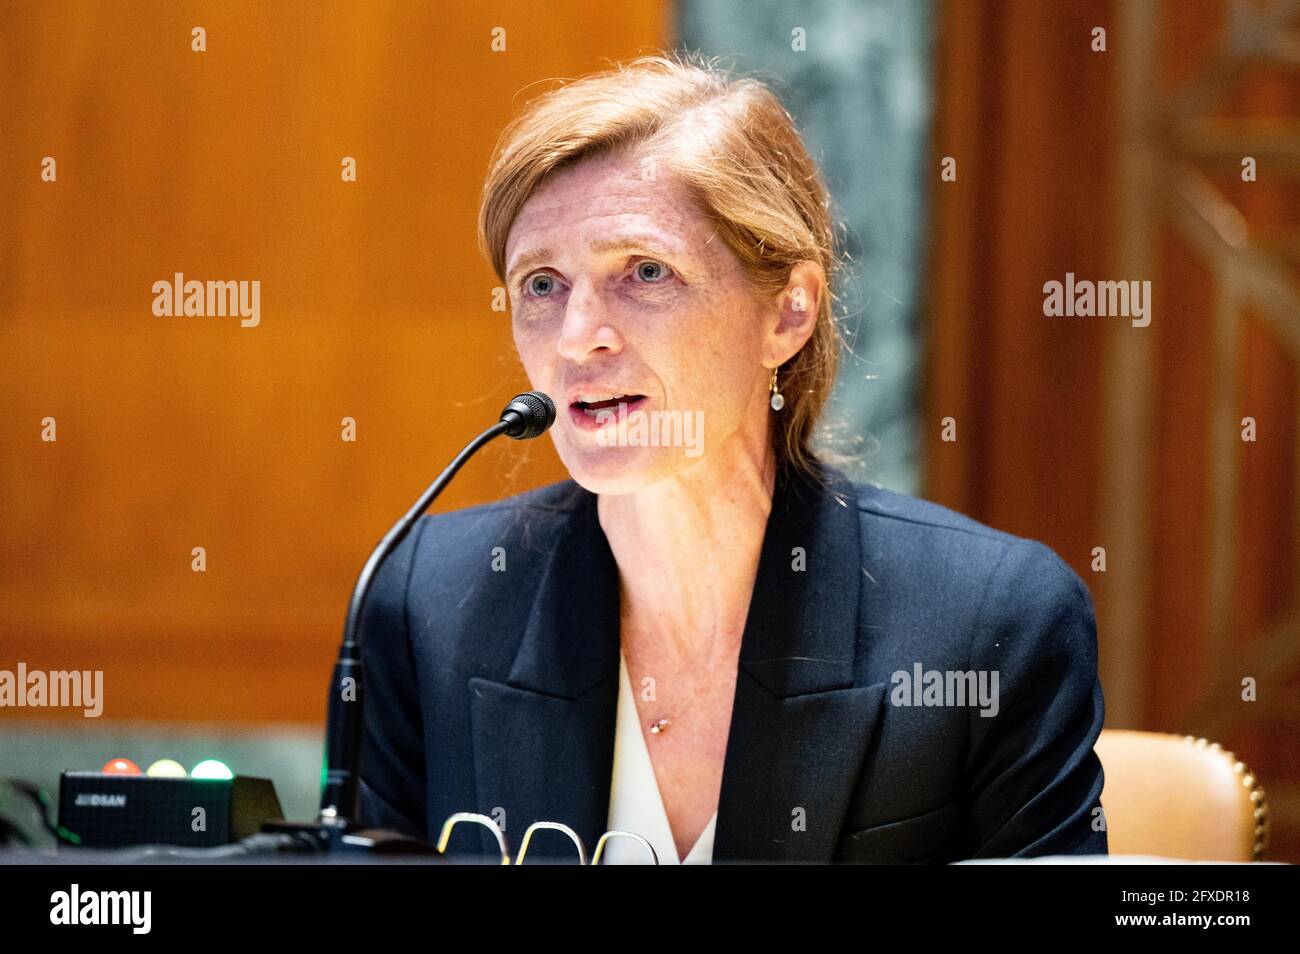 Washington, USA 26. Mai 2021. 26. Mai 2021 - Washington, DC, USA: Samantha Power, Administrator, United States Agency for International Development, spricht bei einer Anhörung des Senate Appropriations Committee Subcommittee on State, Foreign Operations, and Related Programs. (Foto: Michael Brochstein/Sipa USA) Quelle: SIPA USA/Alamy Live News Stockfoto